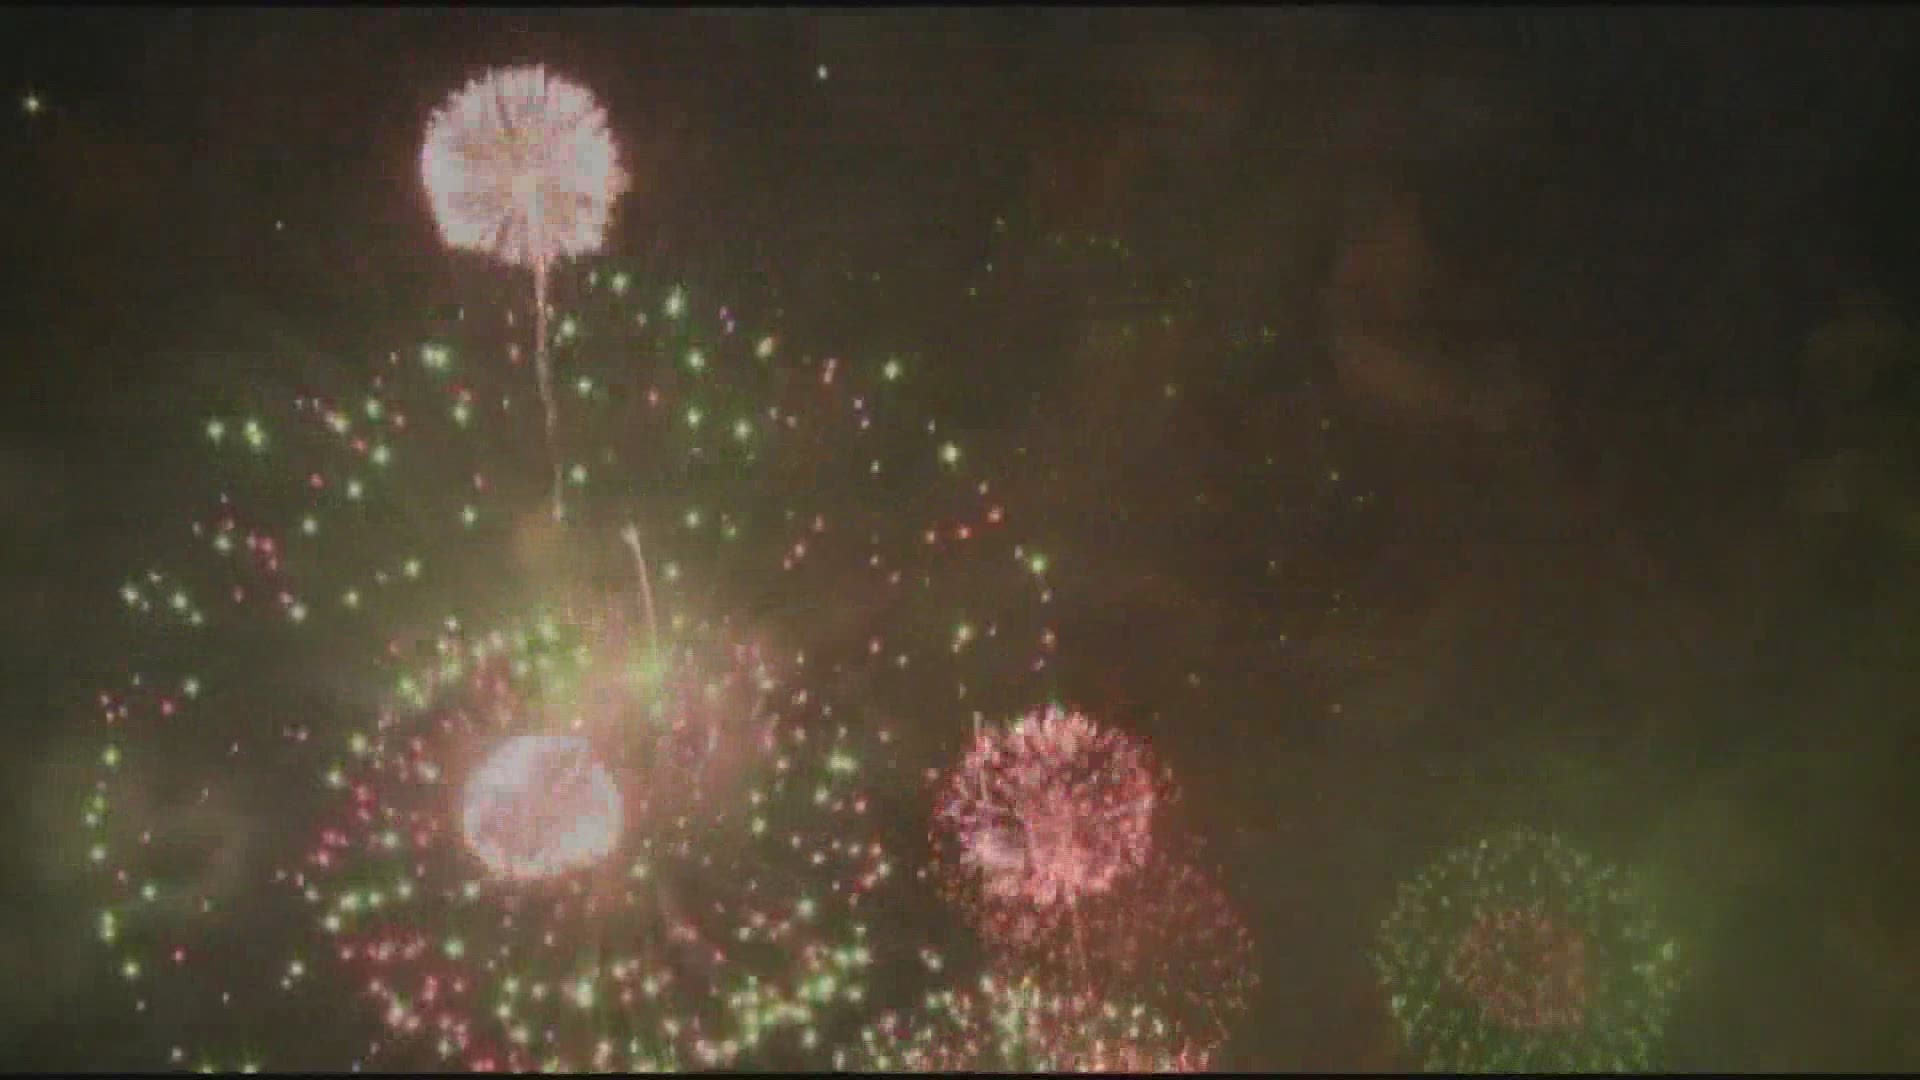 In 2020, 14 individuals were taken to medical facilities due to injuries caused by fireworks, according to the Maine Emergency Medical Management system.